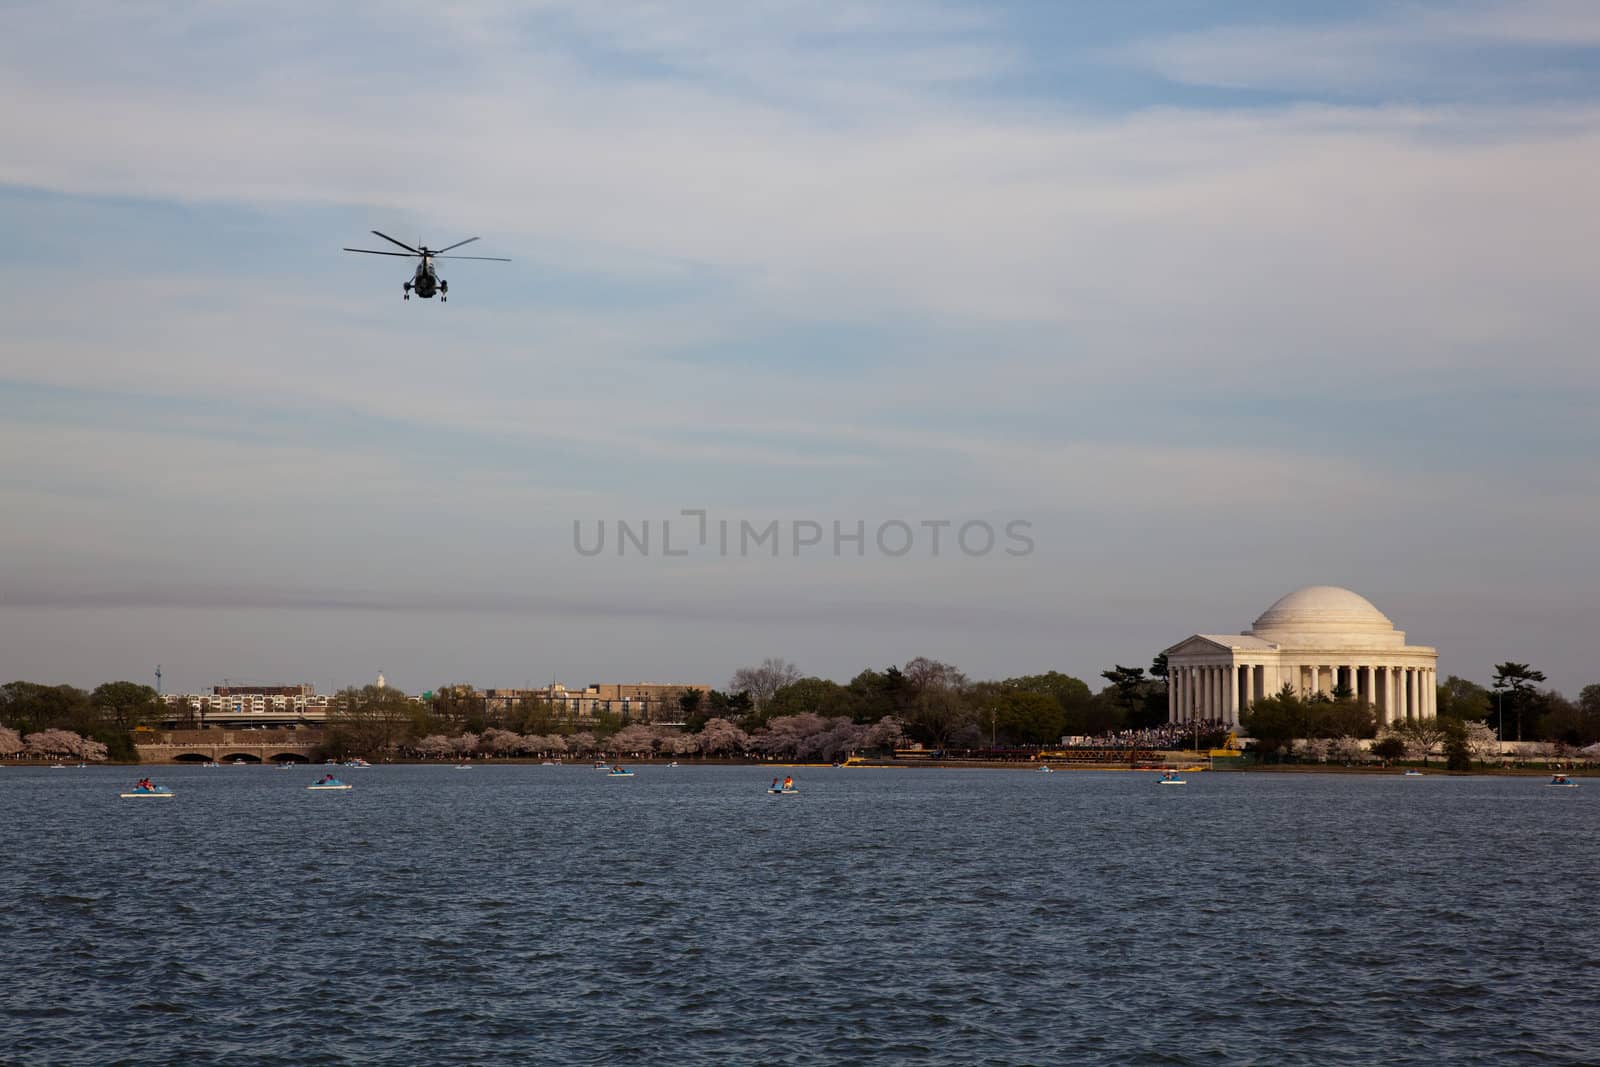 View of Jefferson Memorial with Helicopter flying across the sky